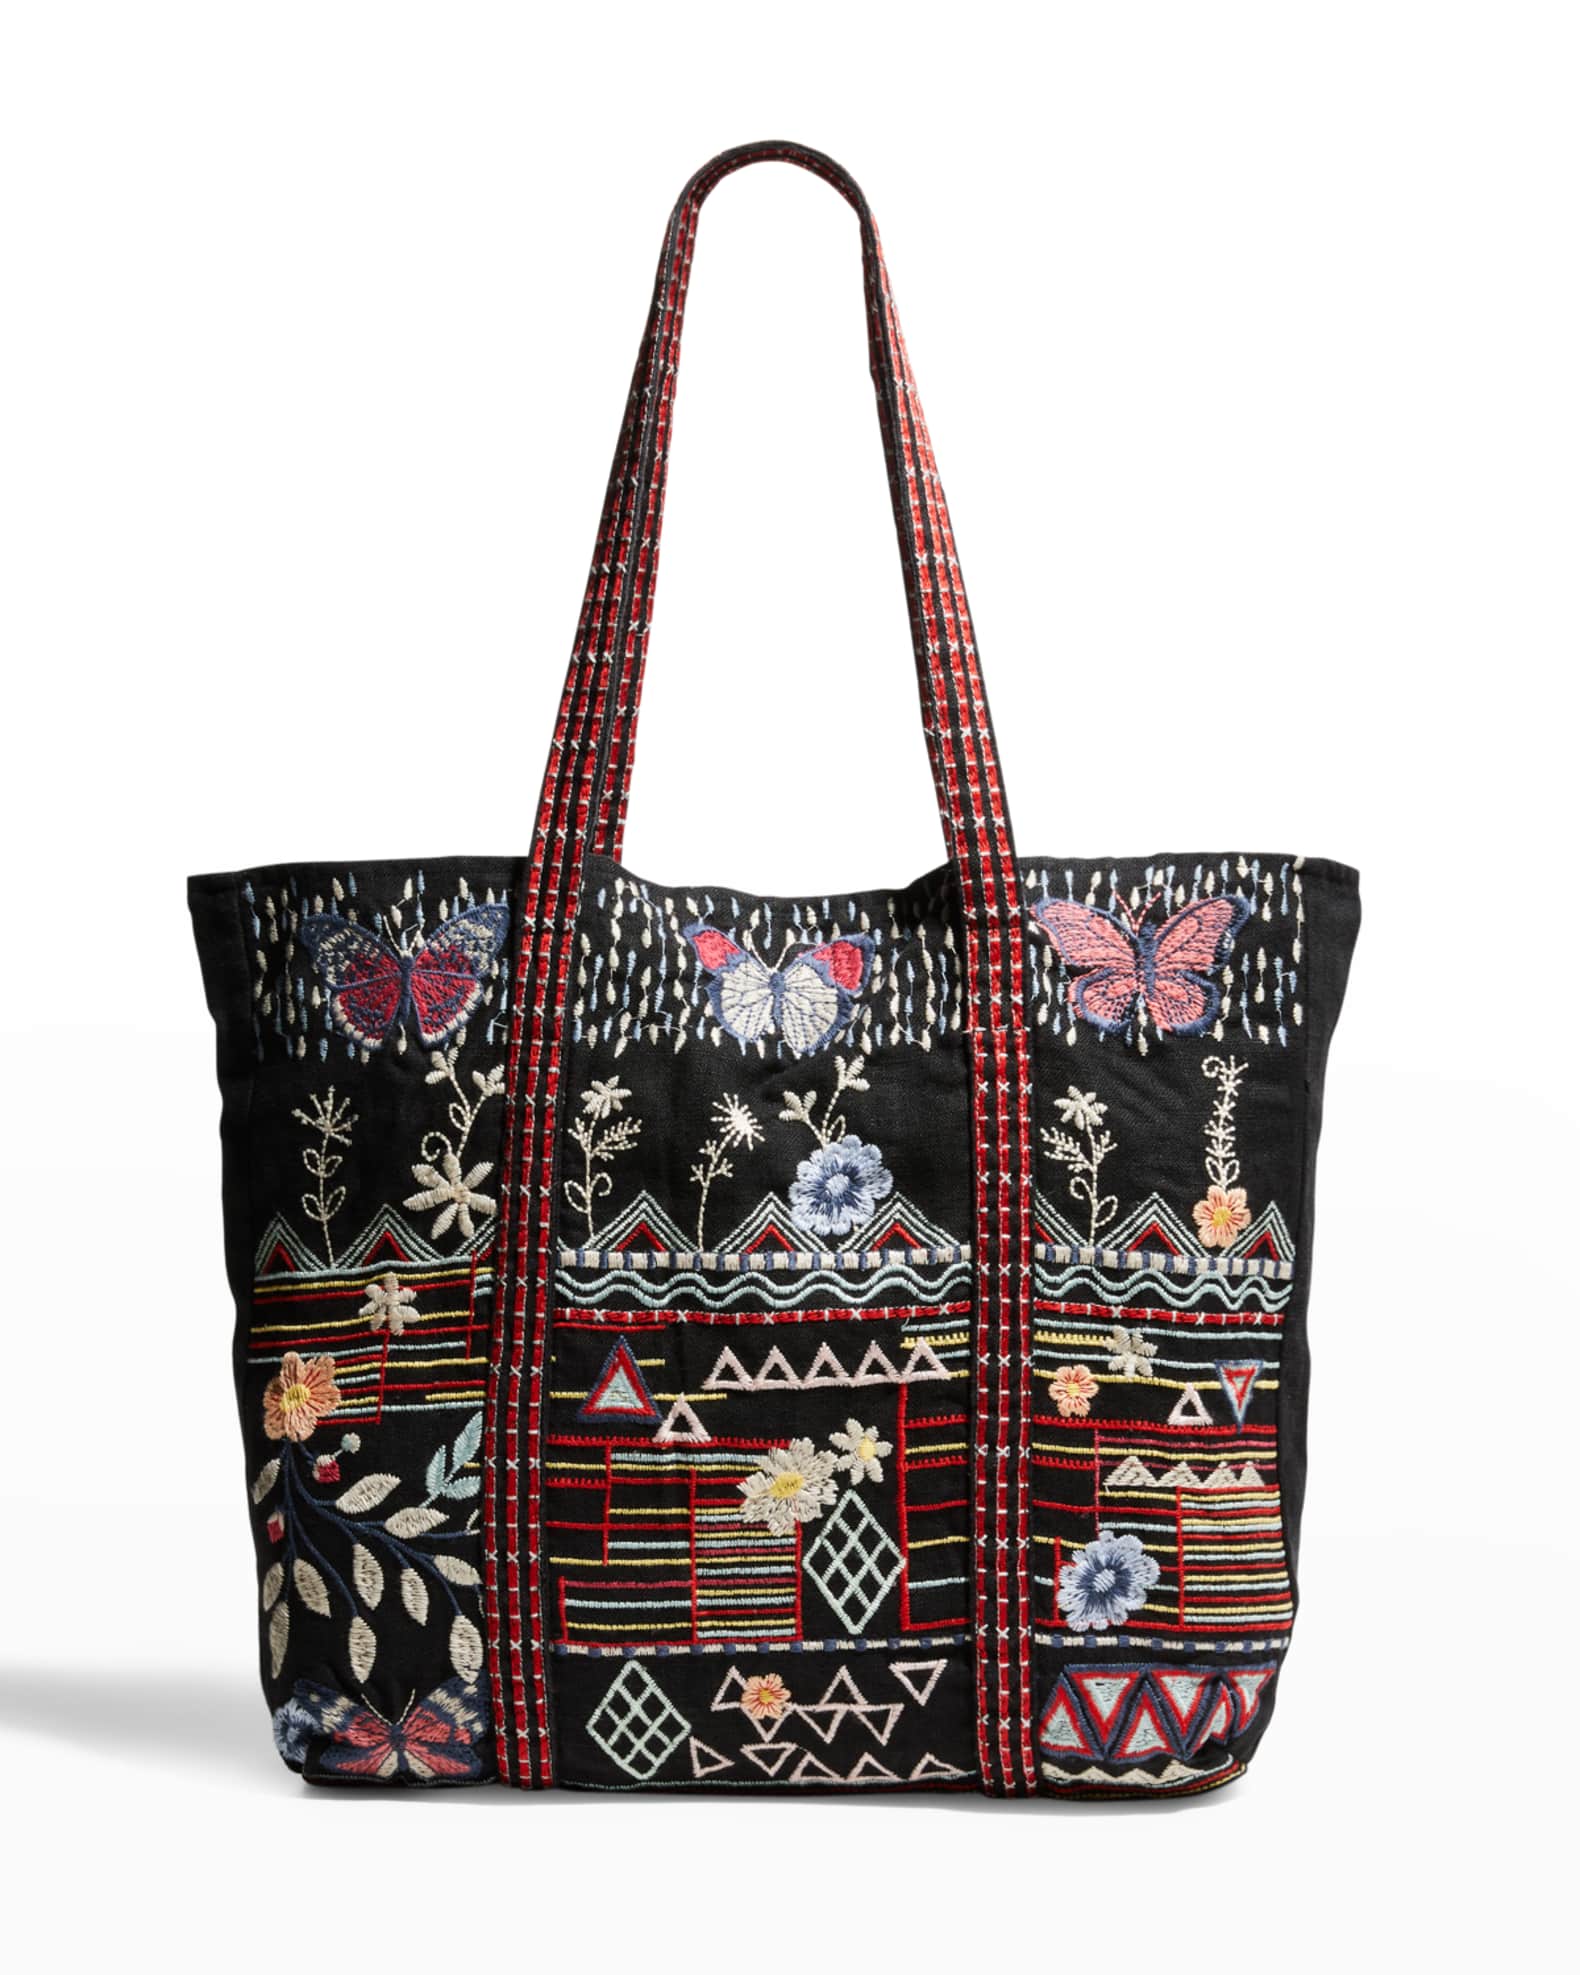 Johnny Was Aravis Embroidered Linen Tote Bag | Neiman Marcus